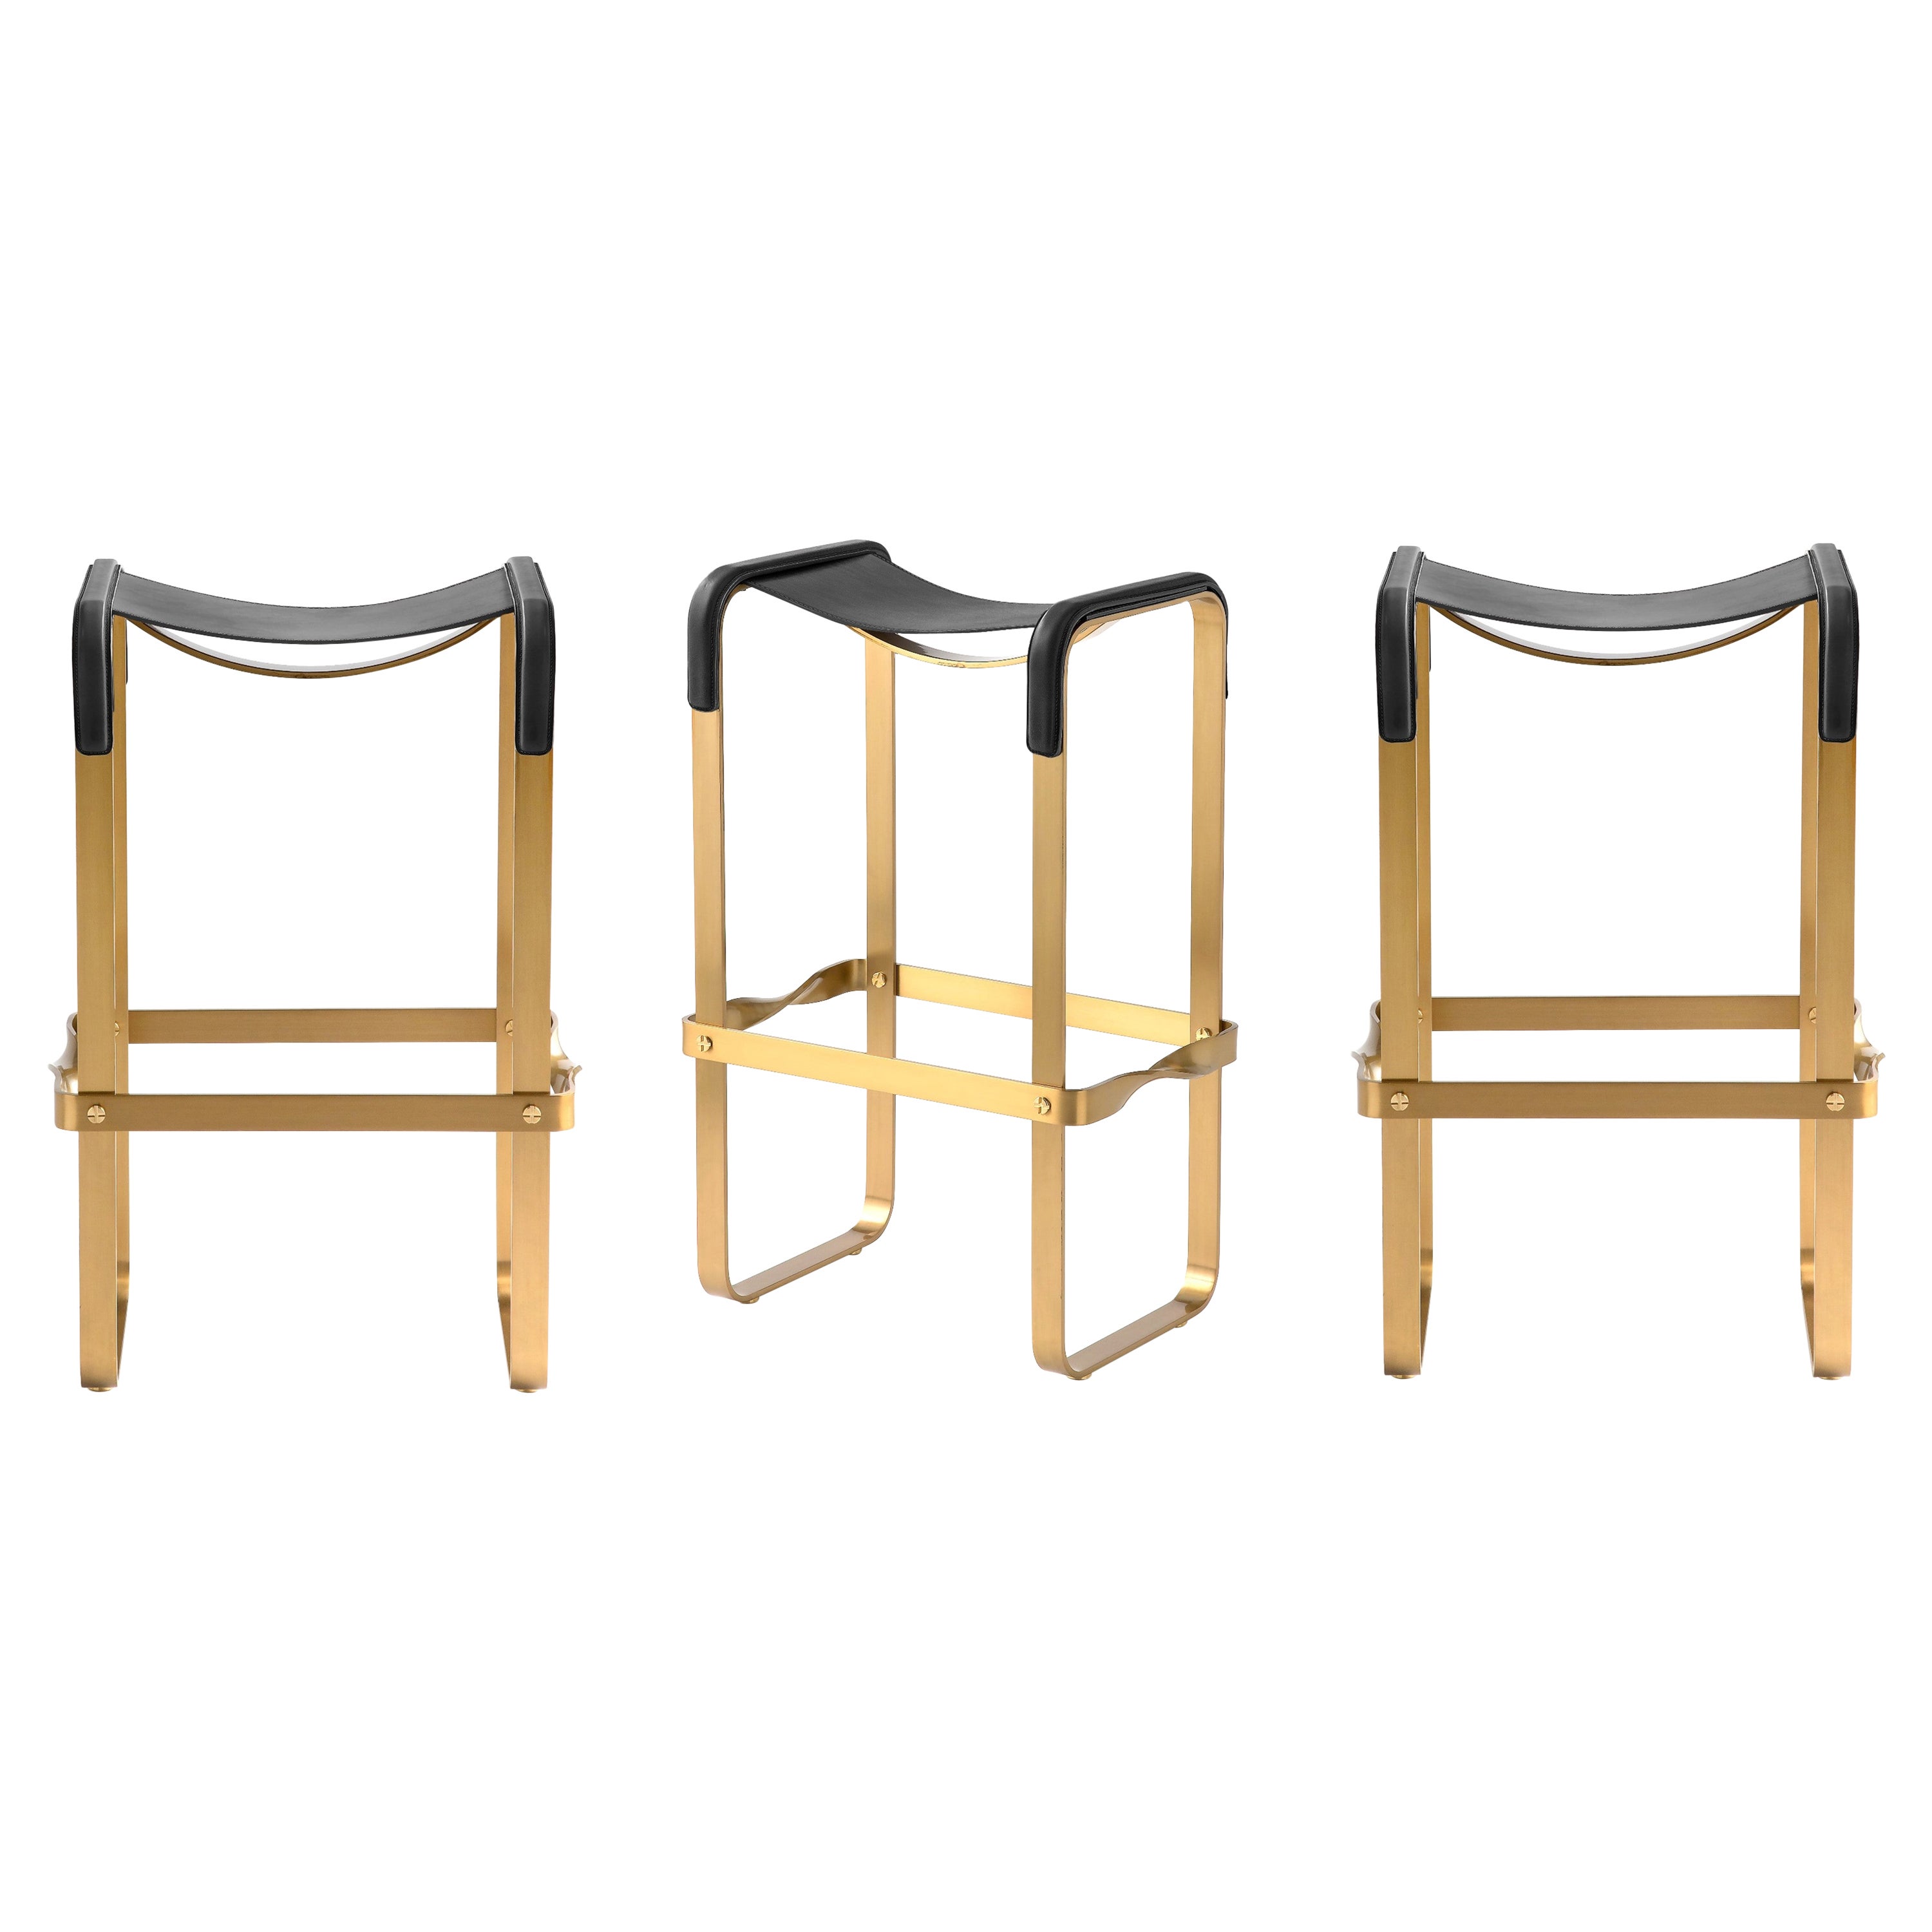 Set of 3 Contemporary Bar Stool Aged Brass Metal & Black Leather